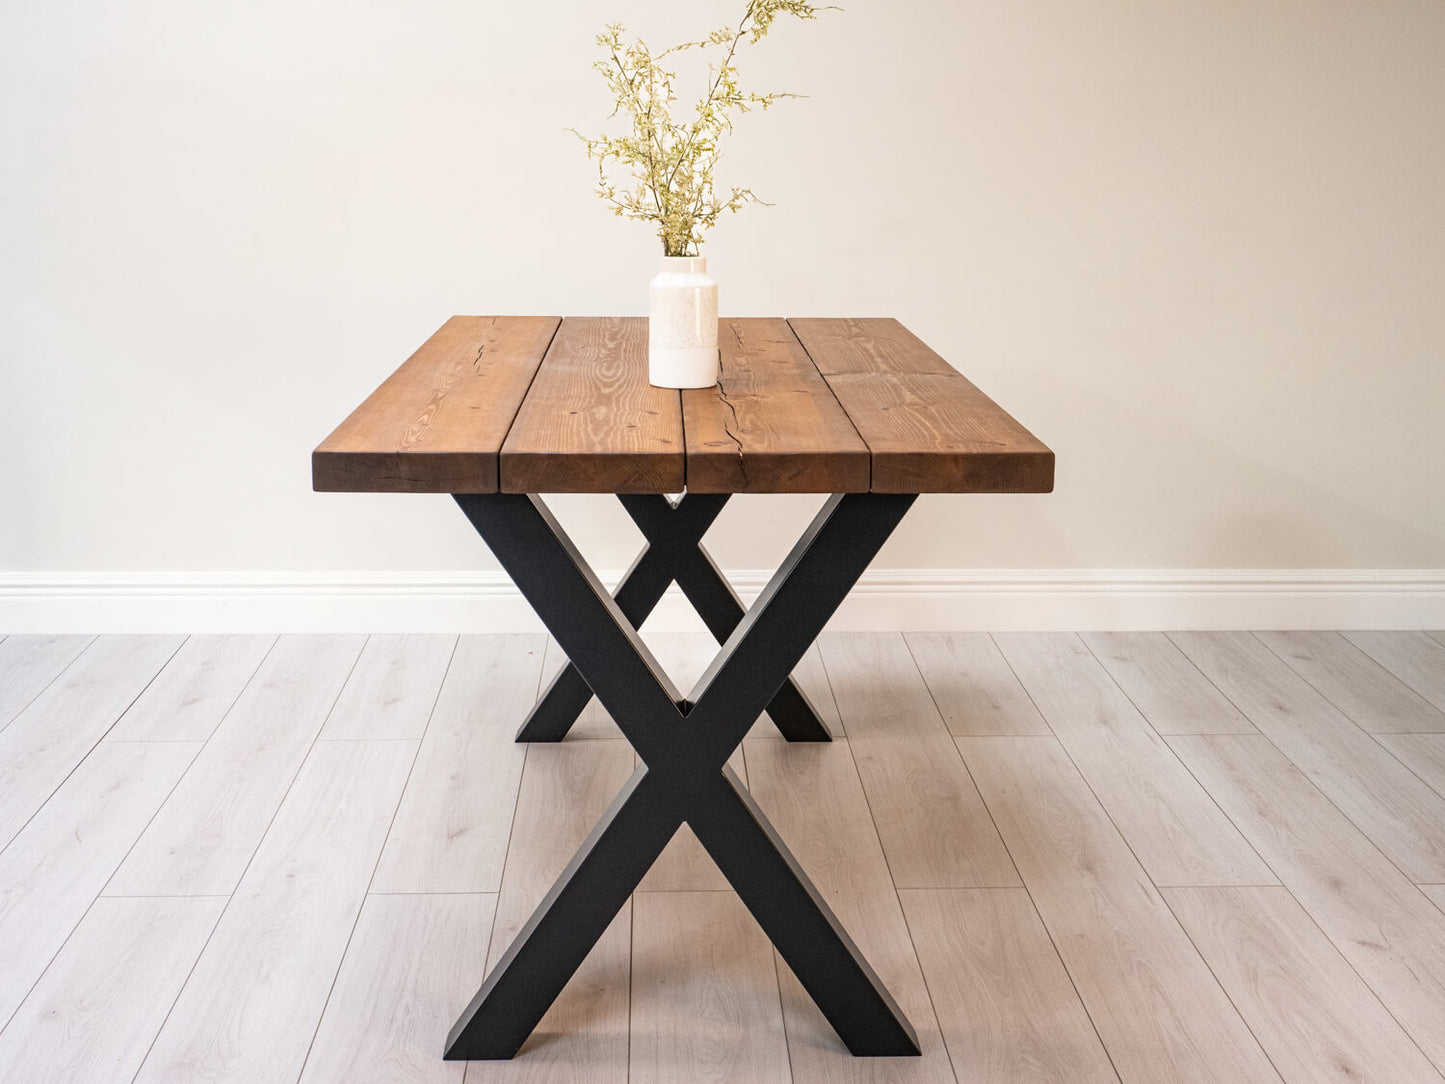 Rustic Pine Table